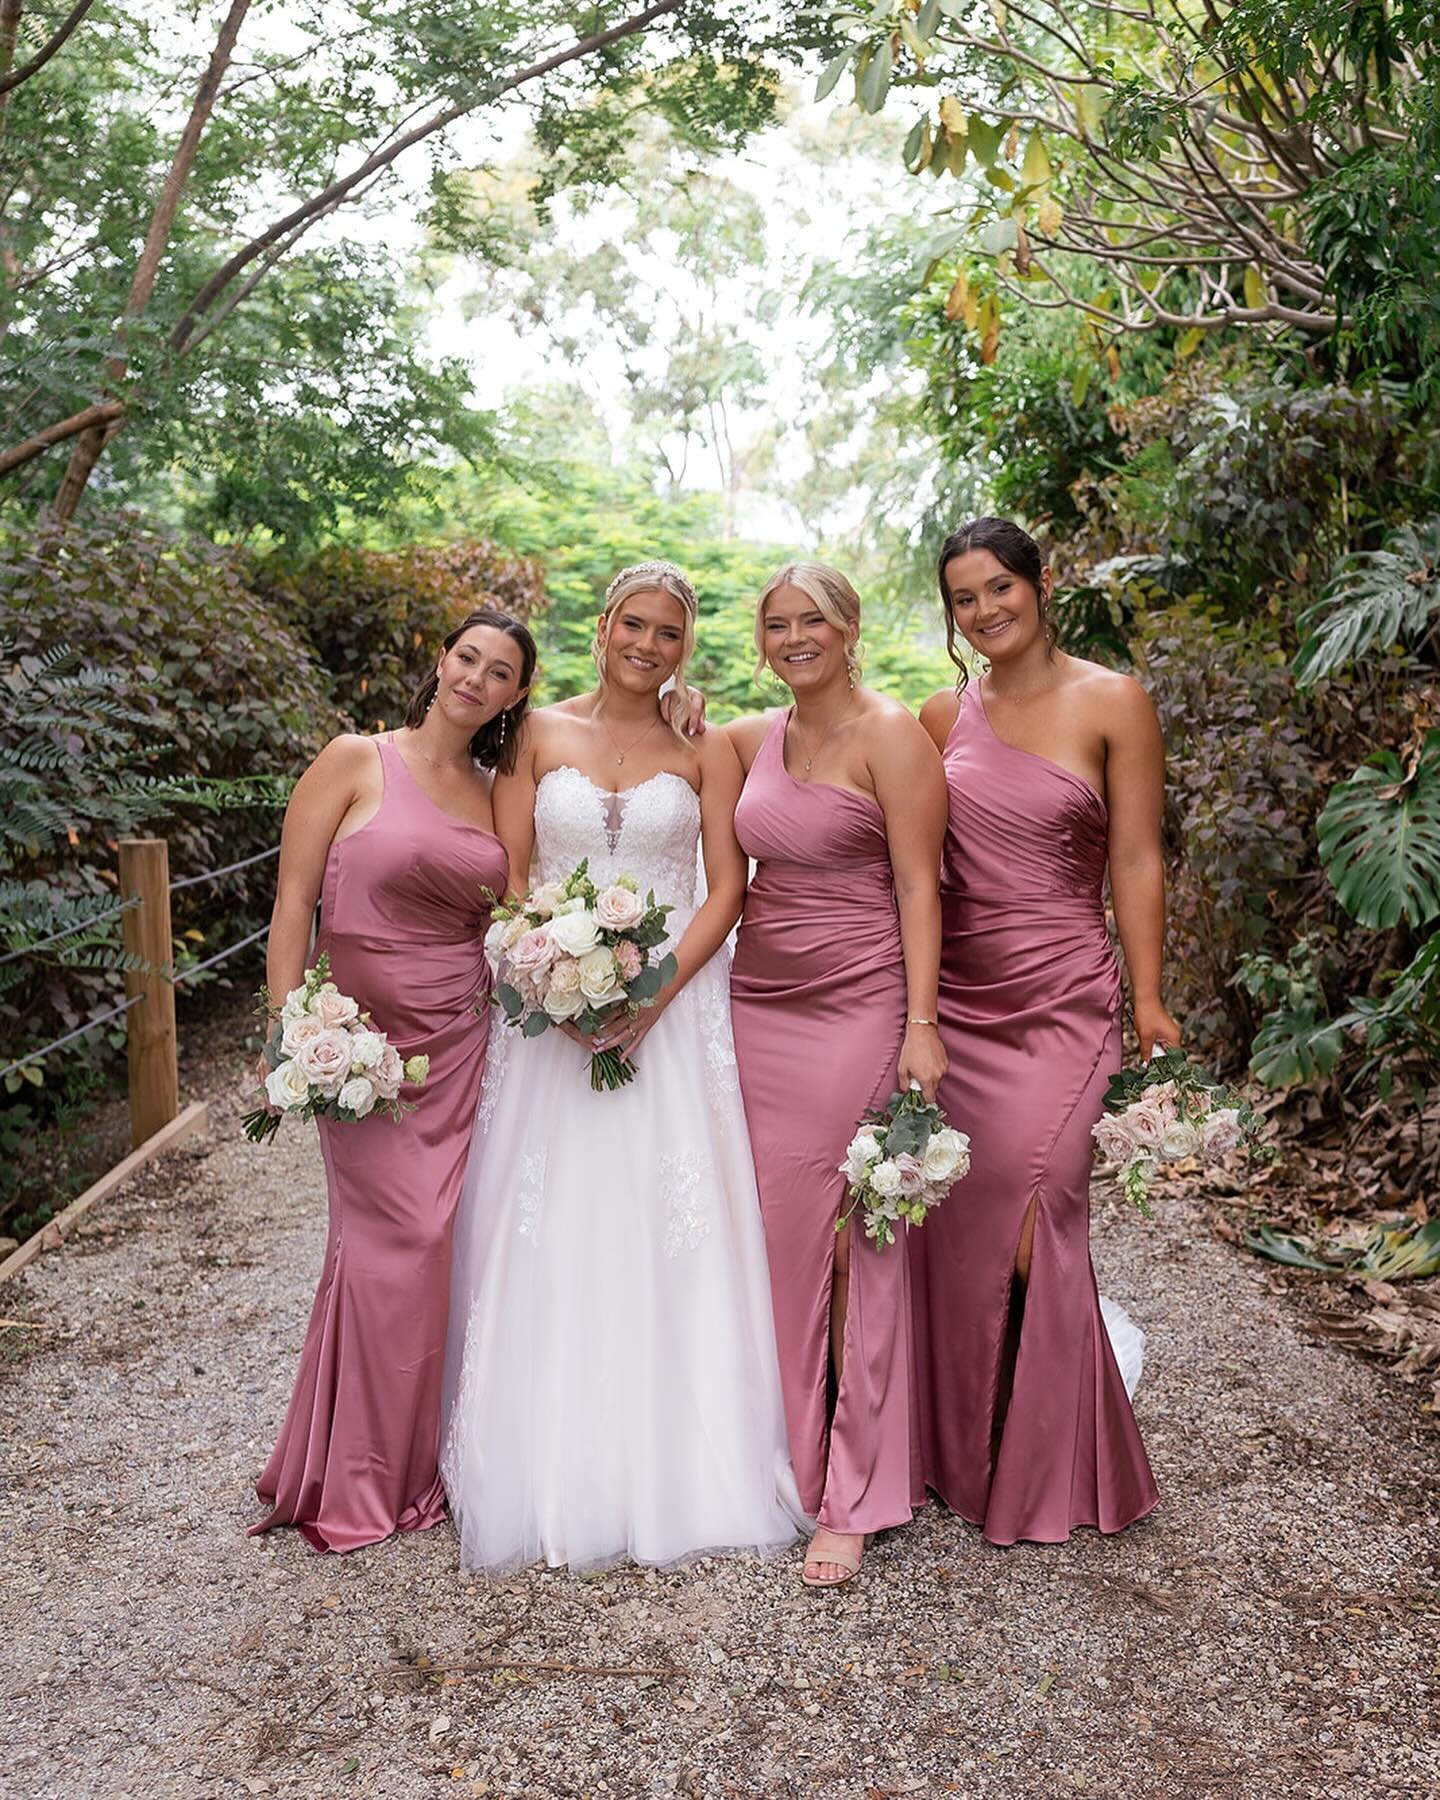 We had the absolute pleasure of doing Casey and her stunning bridesmaids makeup for Casey and Jackson&rsquo;s wedding day at @canungravalleyvineyards 

Swipe to save the floral arbour for inspo!! 

Makeup by our exclusive bridal makeup artist Caitlin